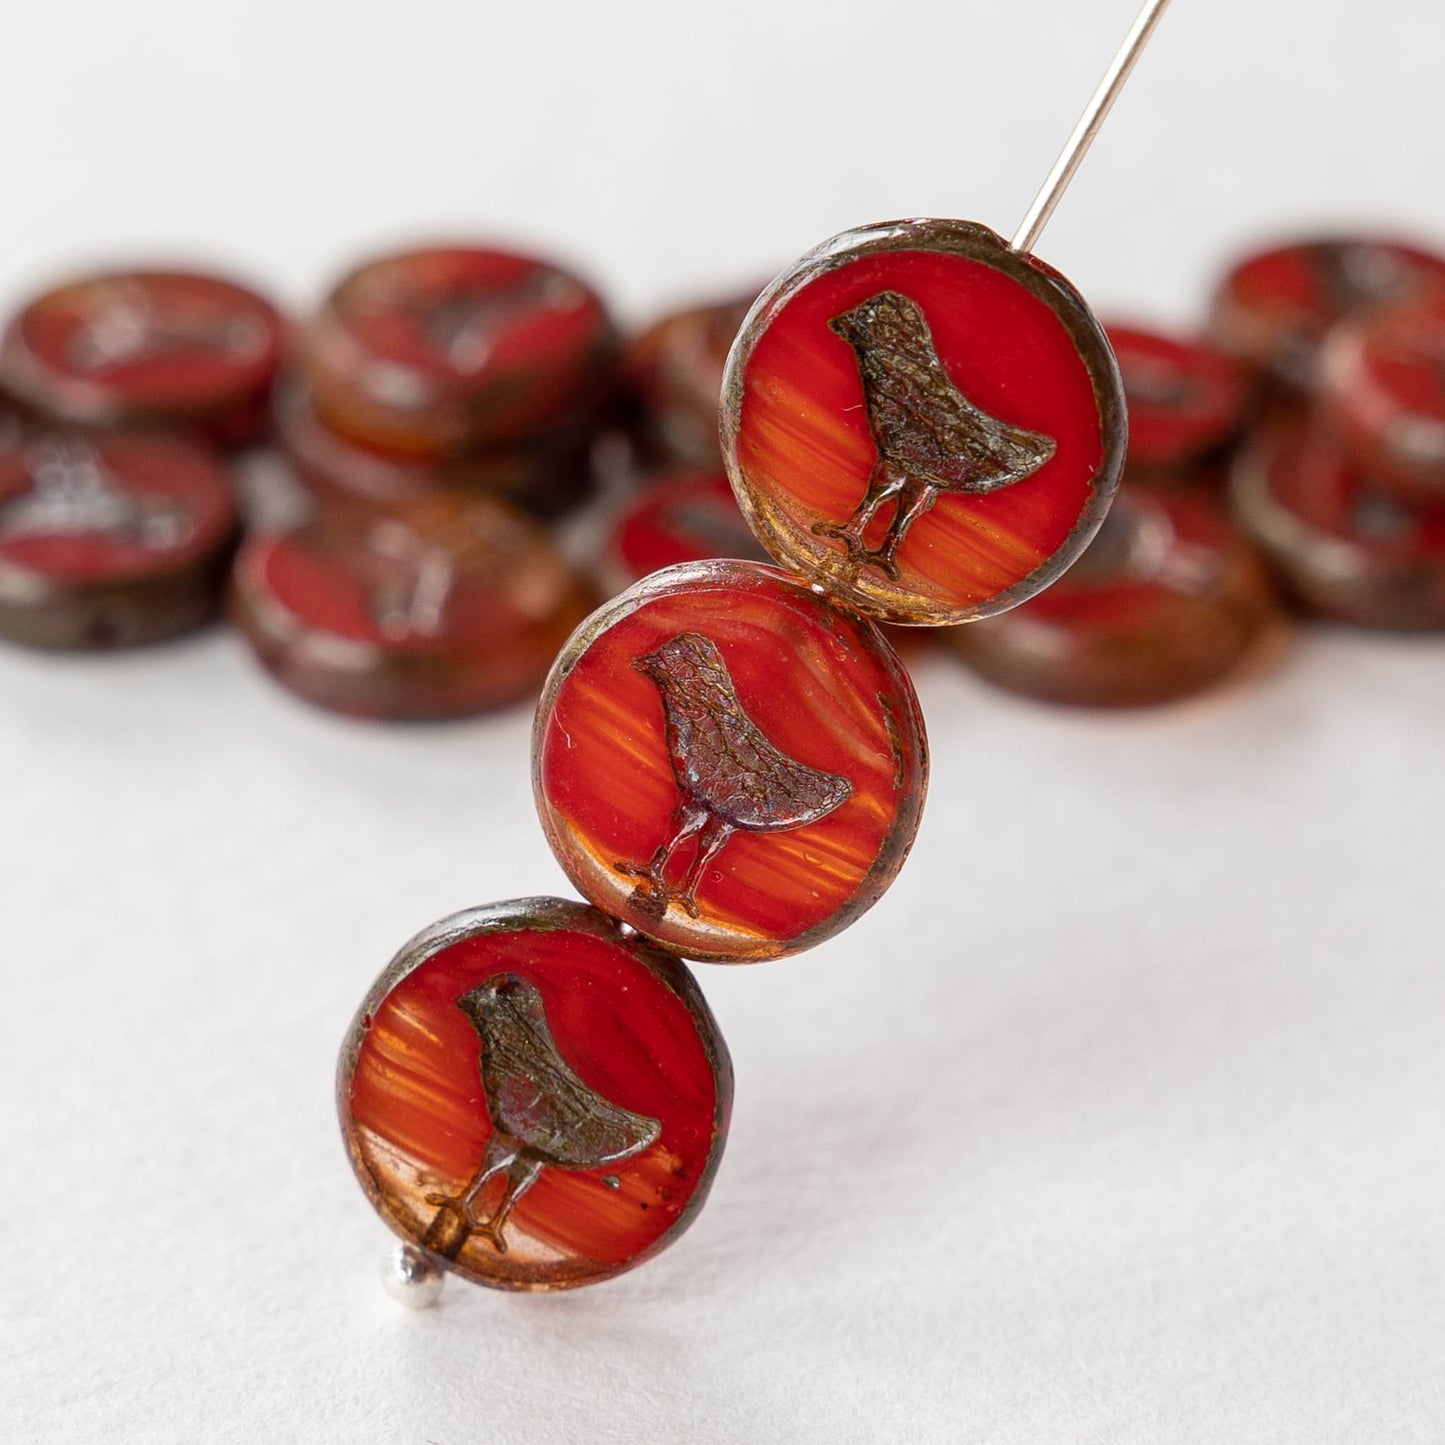 12mm Bird Coin Beads - Hurricane Glass Red w/Picasso - 6 or 12